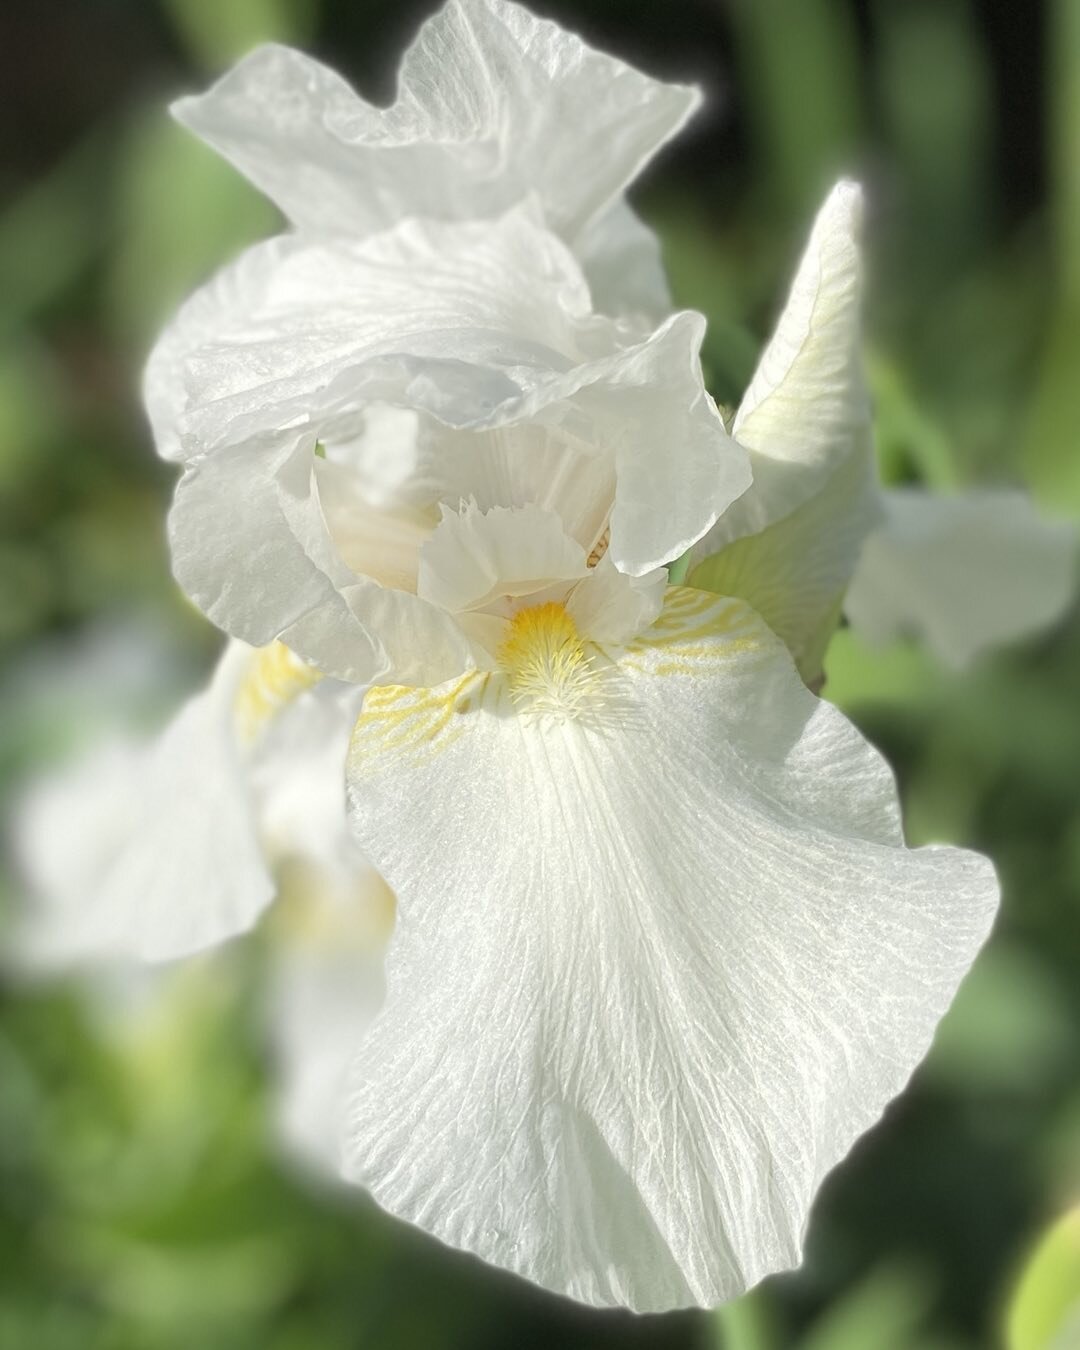 It is Iris season here in the South! This beauty practically glows at sunset. 
#iris #garden #blooms #inspiration #Nashville #flowers #whiteflowers #growingseason